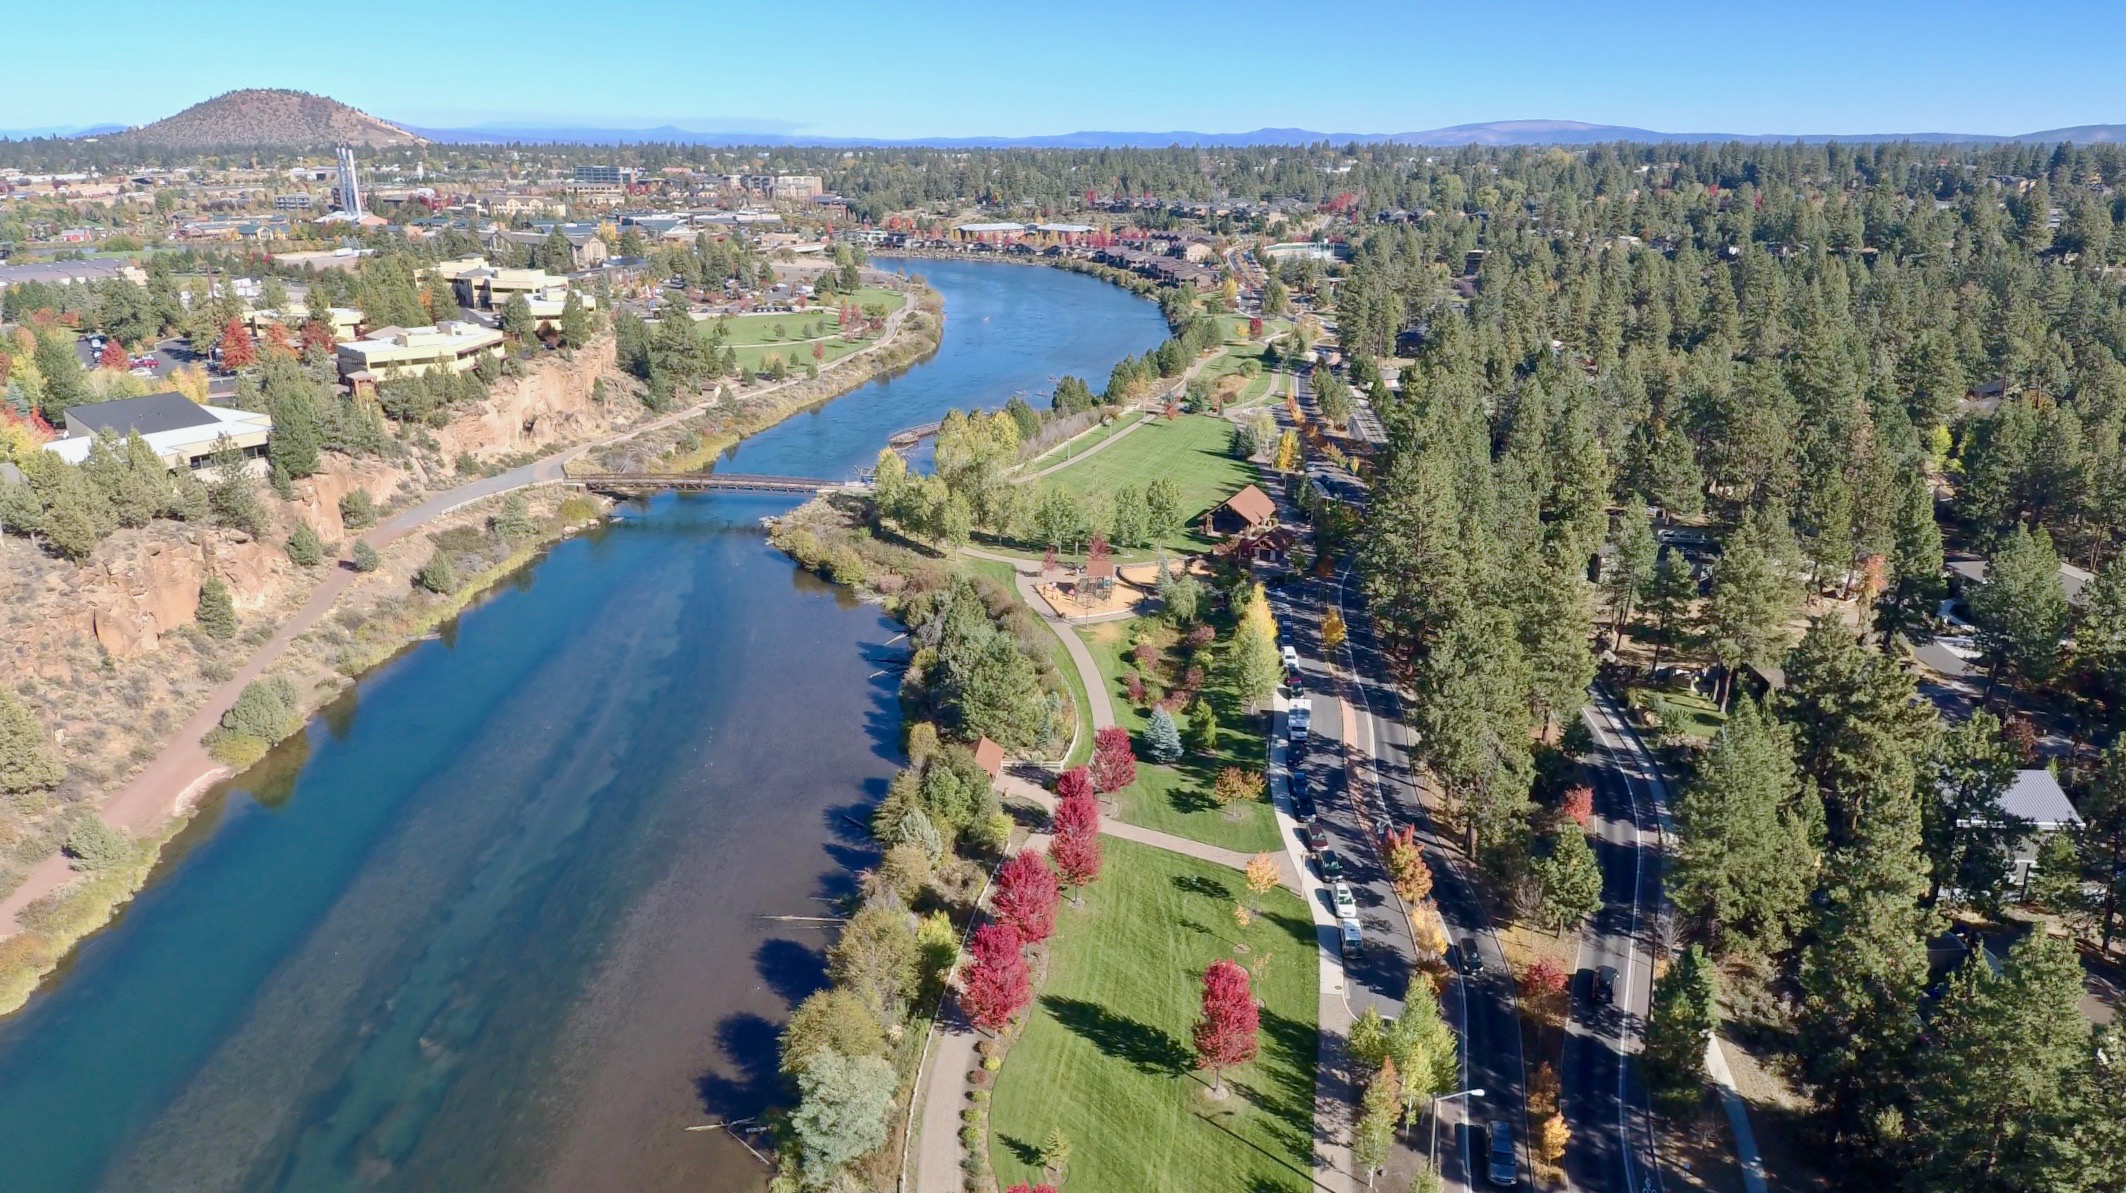 An aerial view of Farewell Bend and Riverbend Parks